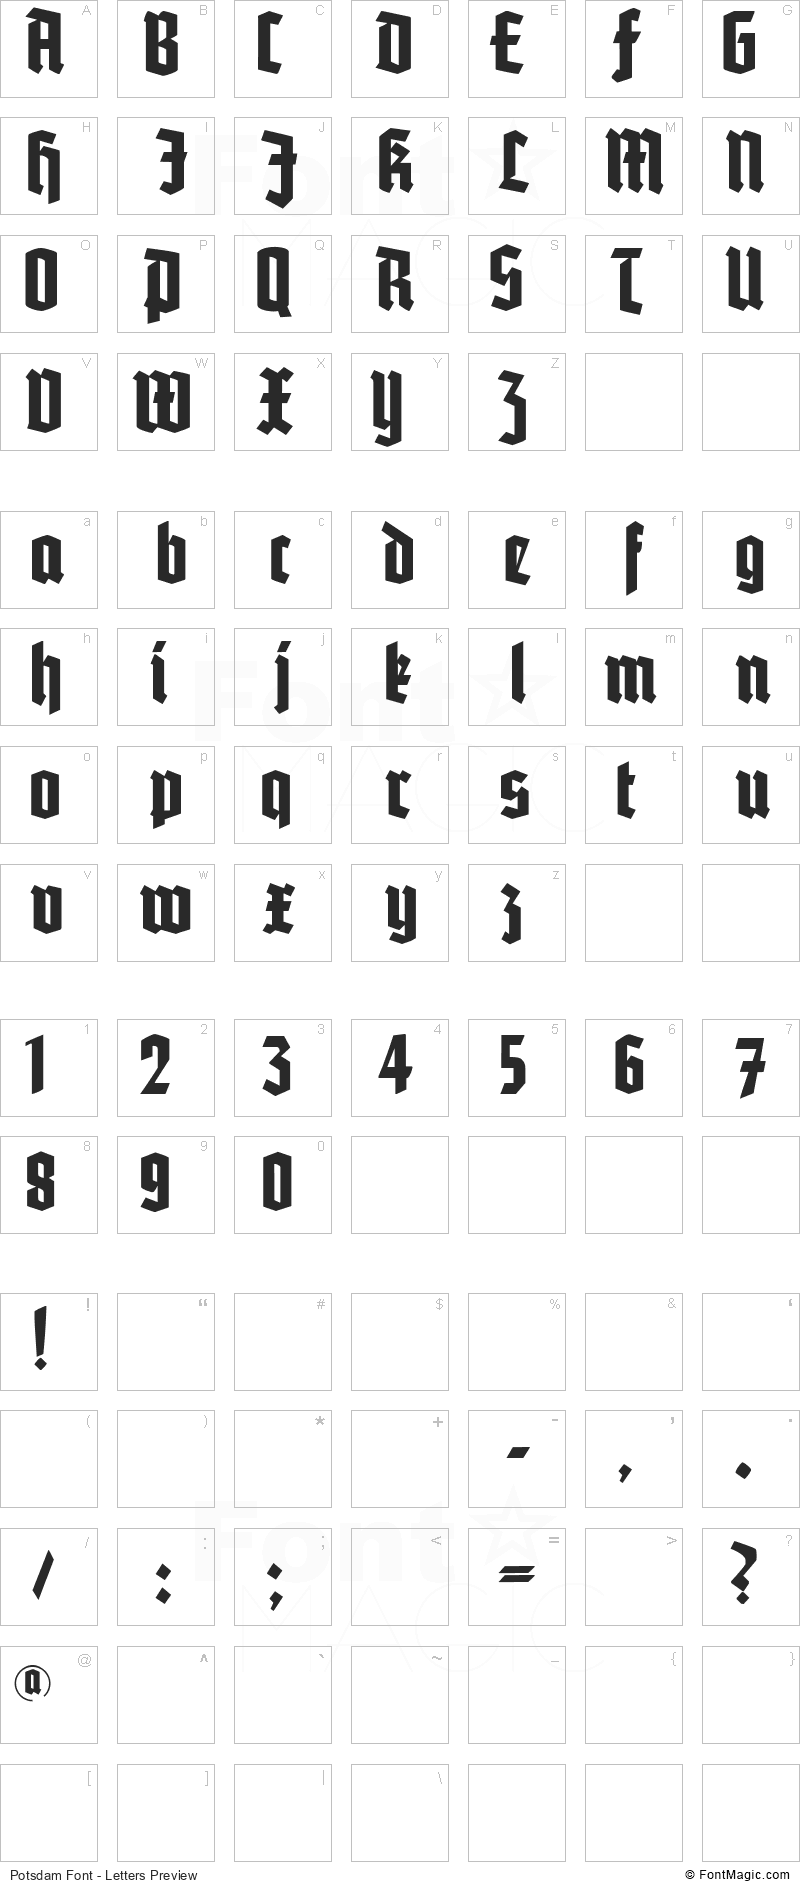 Potsdam Font - All Latters Preview Chart